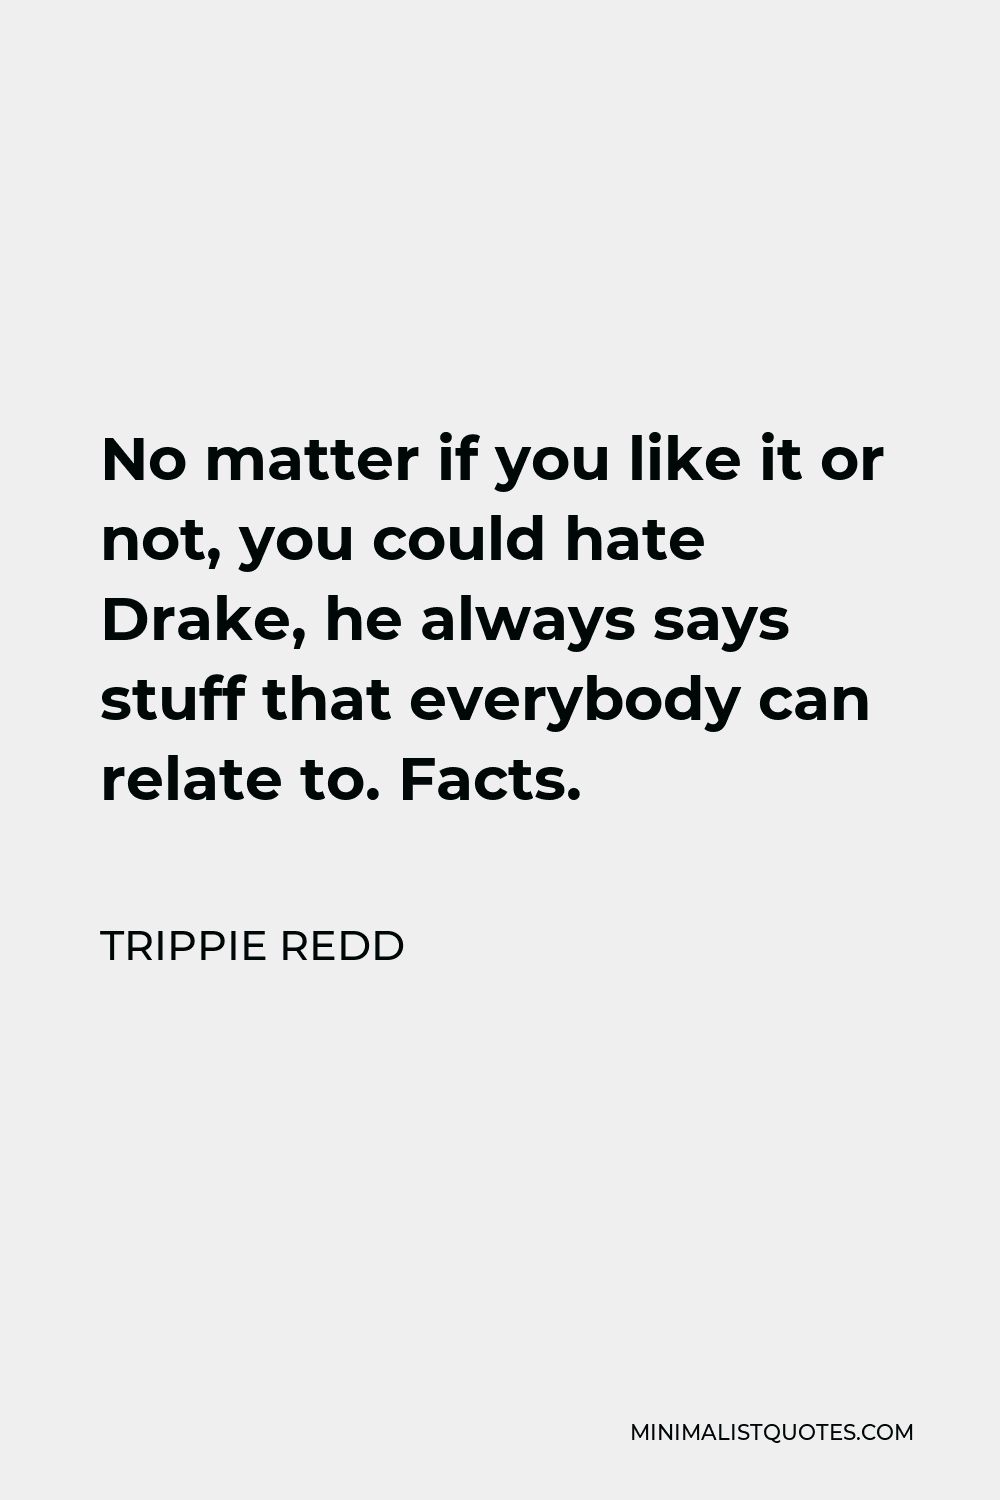 Trippie Redd Quote - No matter if you like it or not, you could hate Drake, he always says stuff that everybody can relate to. Facts.